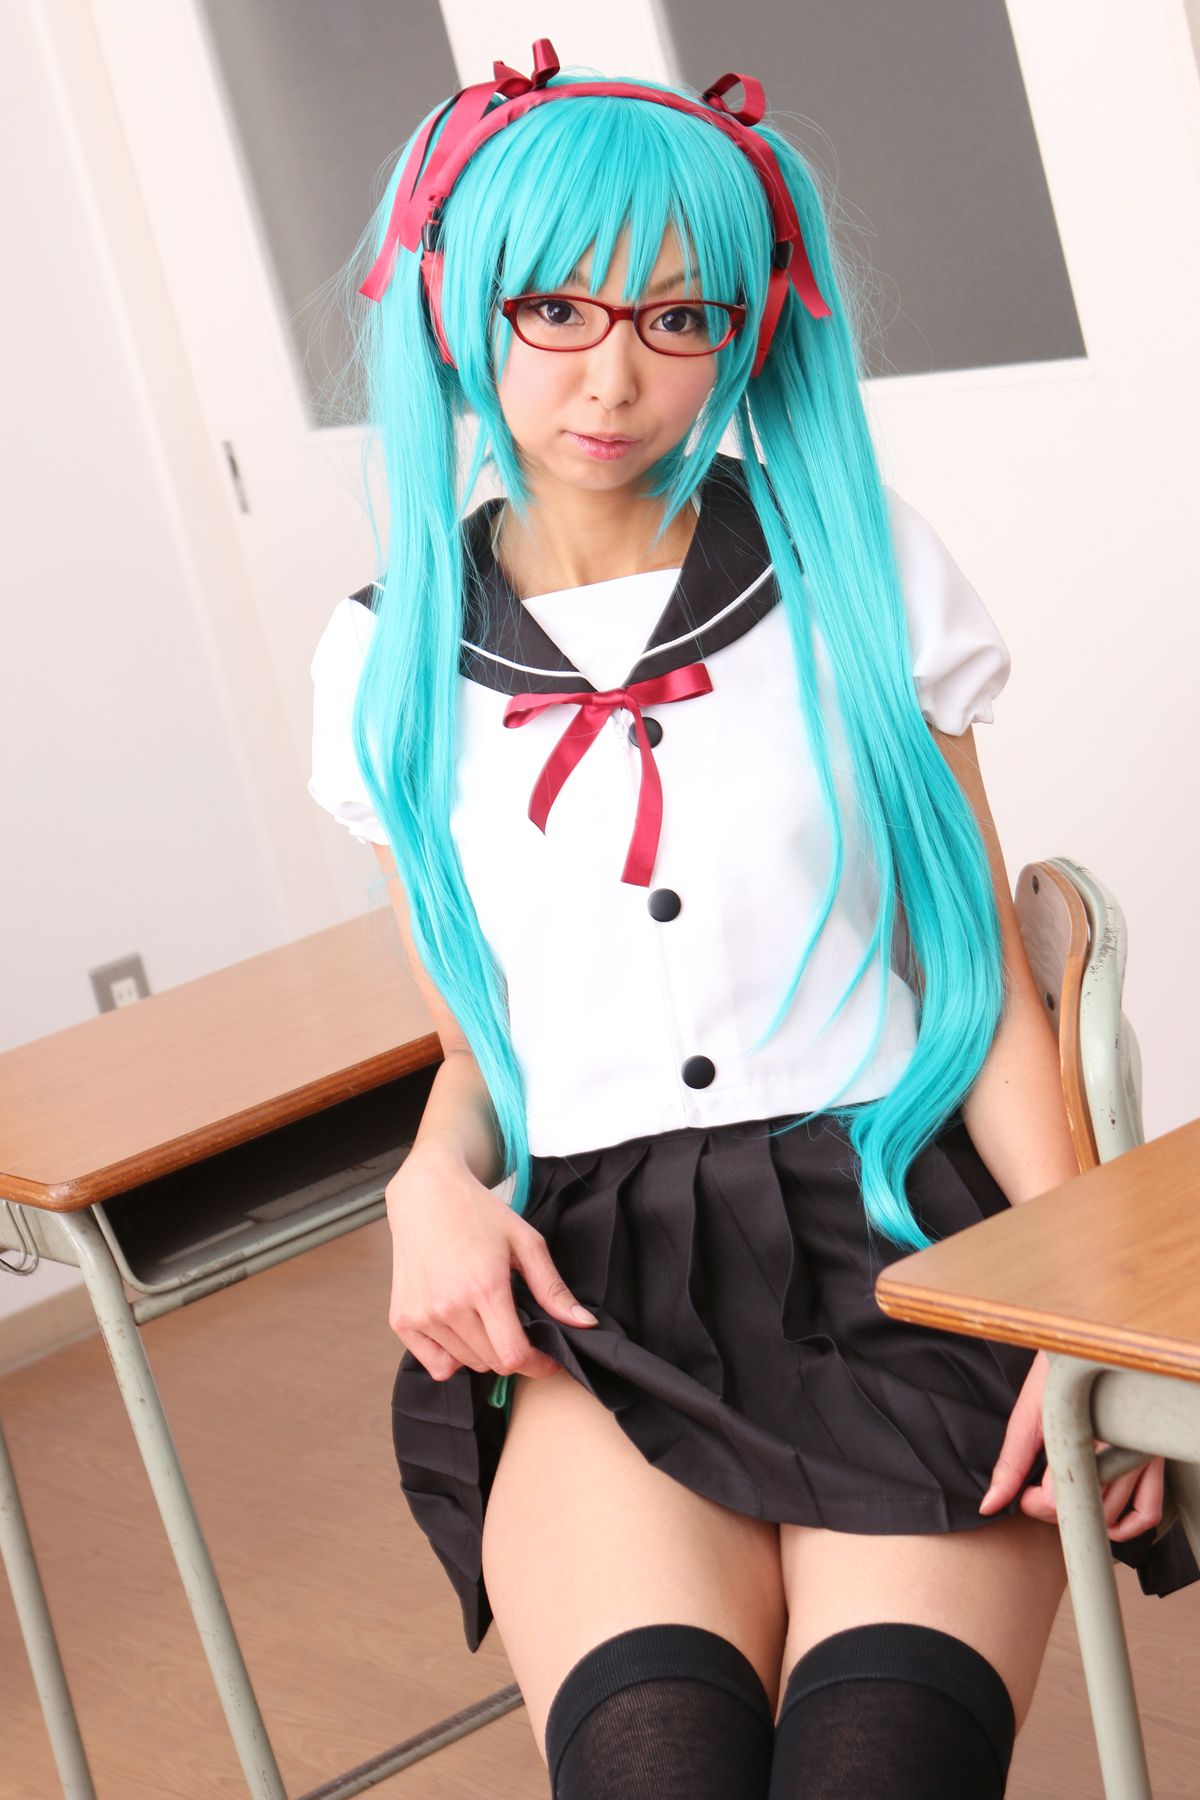 taotuhome[Cosplay套图] New Hatsune Miku from Vocaloid - So Sexy第142张